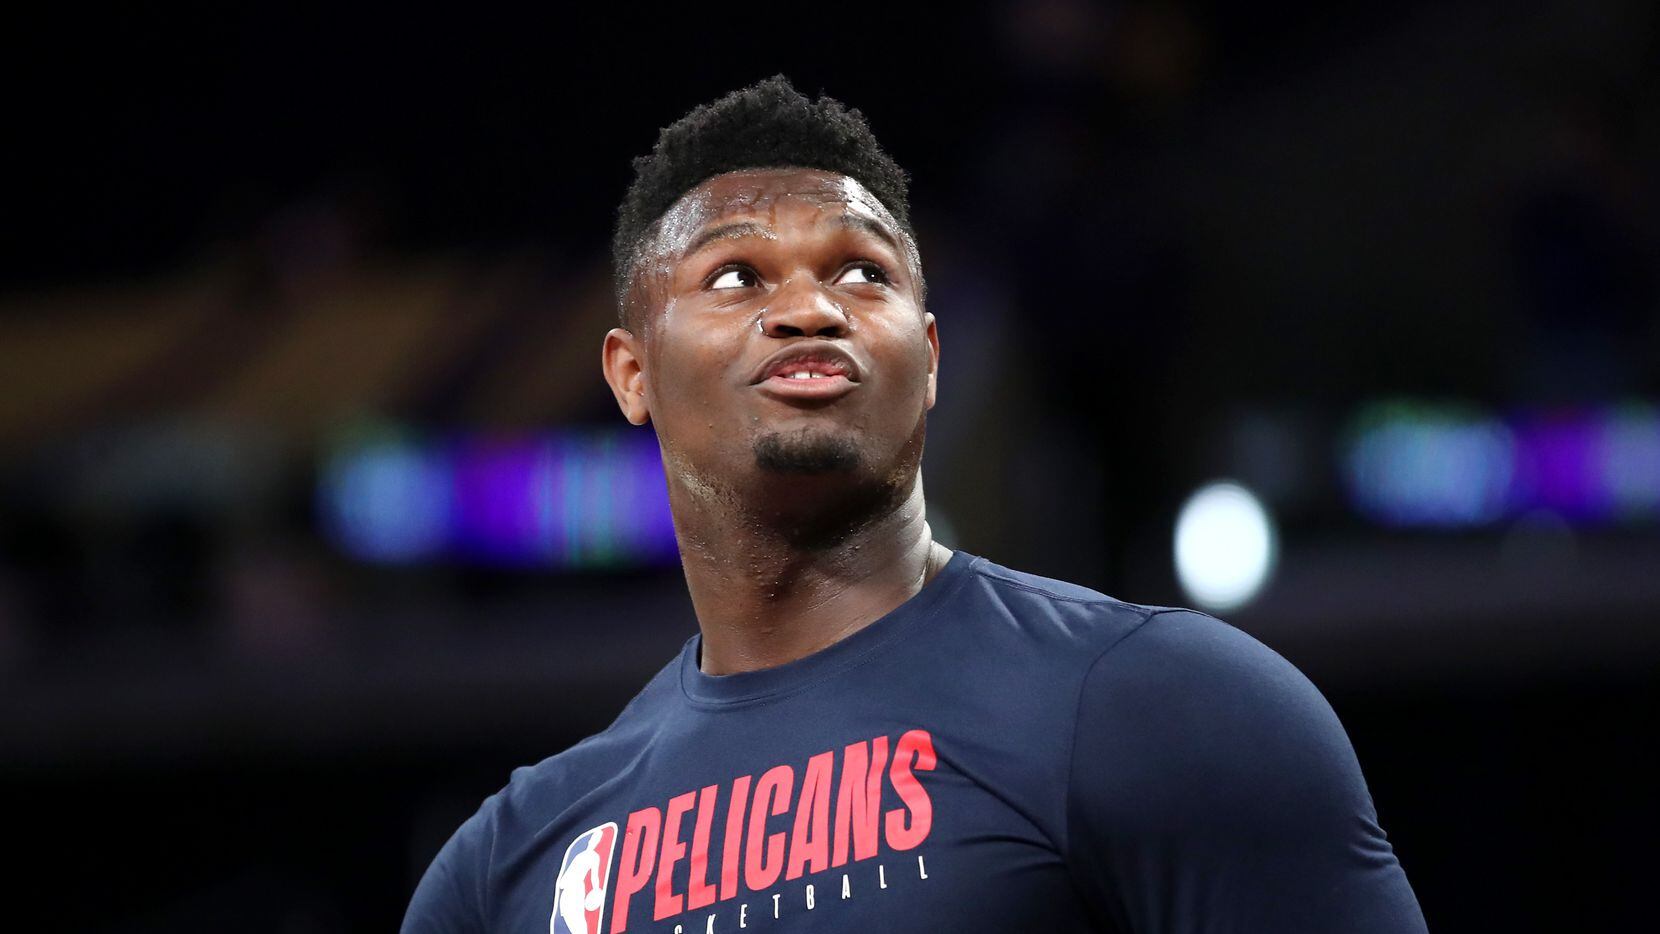 LOS ANGELES, CALIFORNIA - FEBRUARY 25: Zion Williamson #1 of the New Orleans Pelicans warms up before the game against the Los Angeles Lakers at Staples Center on February 25, 2020 in Los Angeles, California. NOTE TO USER: User expressly acknowledges and agrees that, by downloading and or using this Photograph, user is consenting to the terms and conditions of the Getty Images License Agreement.